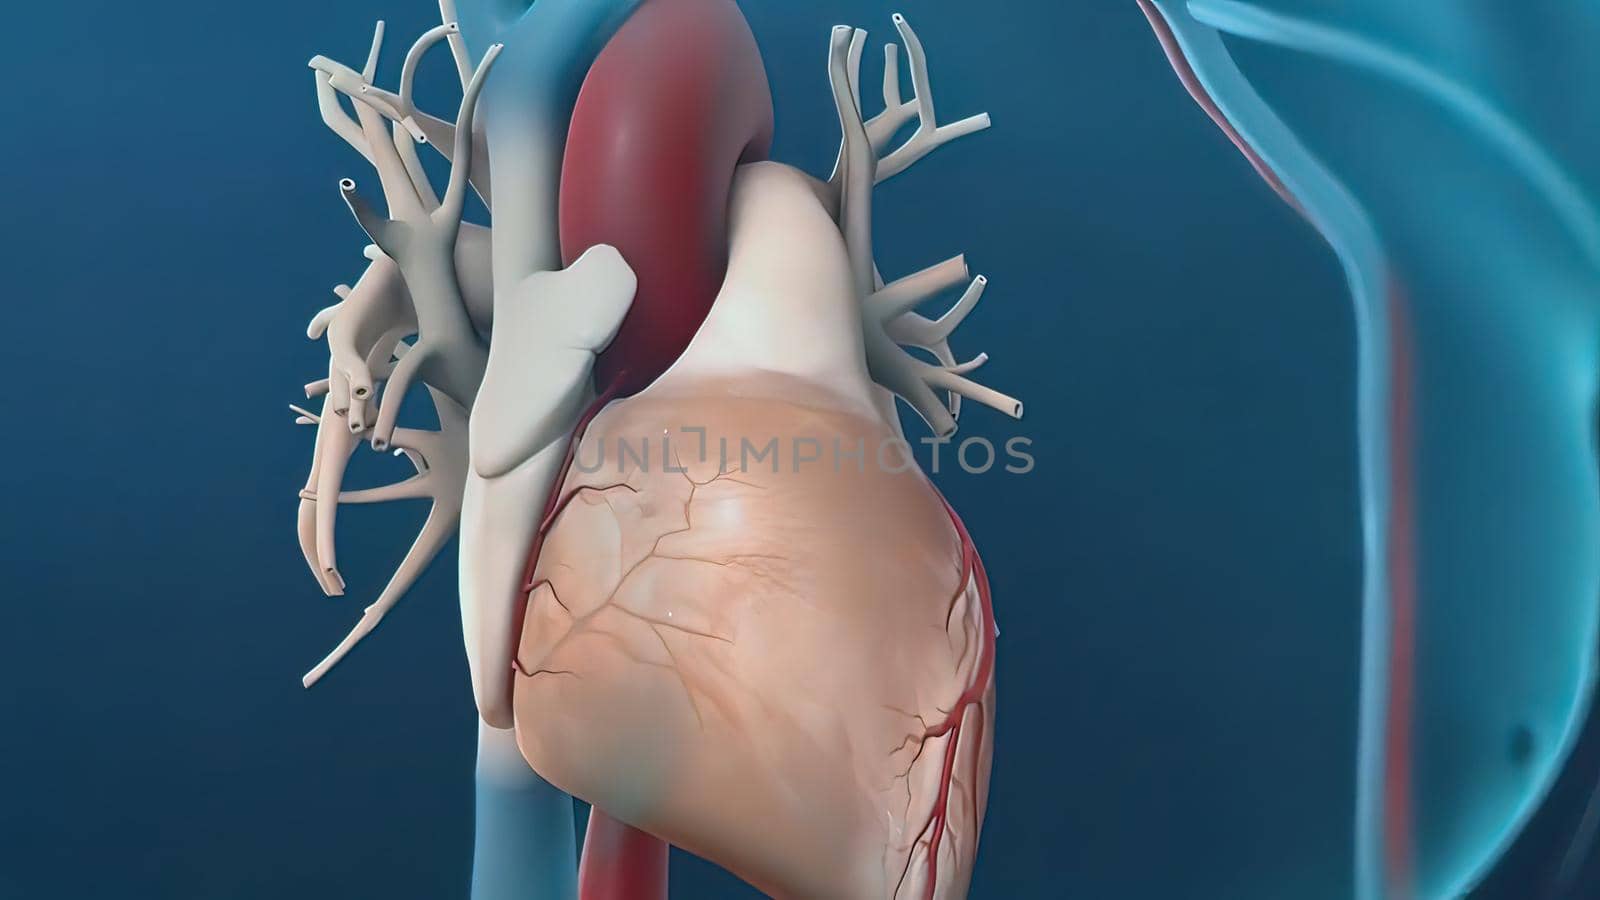 A coronary angioplasty is a procedure used to widen blocked or narrowed coronary arteries (the main blood vessels supplying the heart). 3D illustration